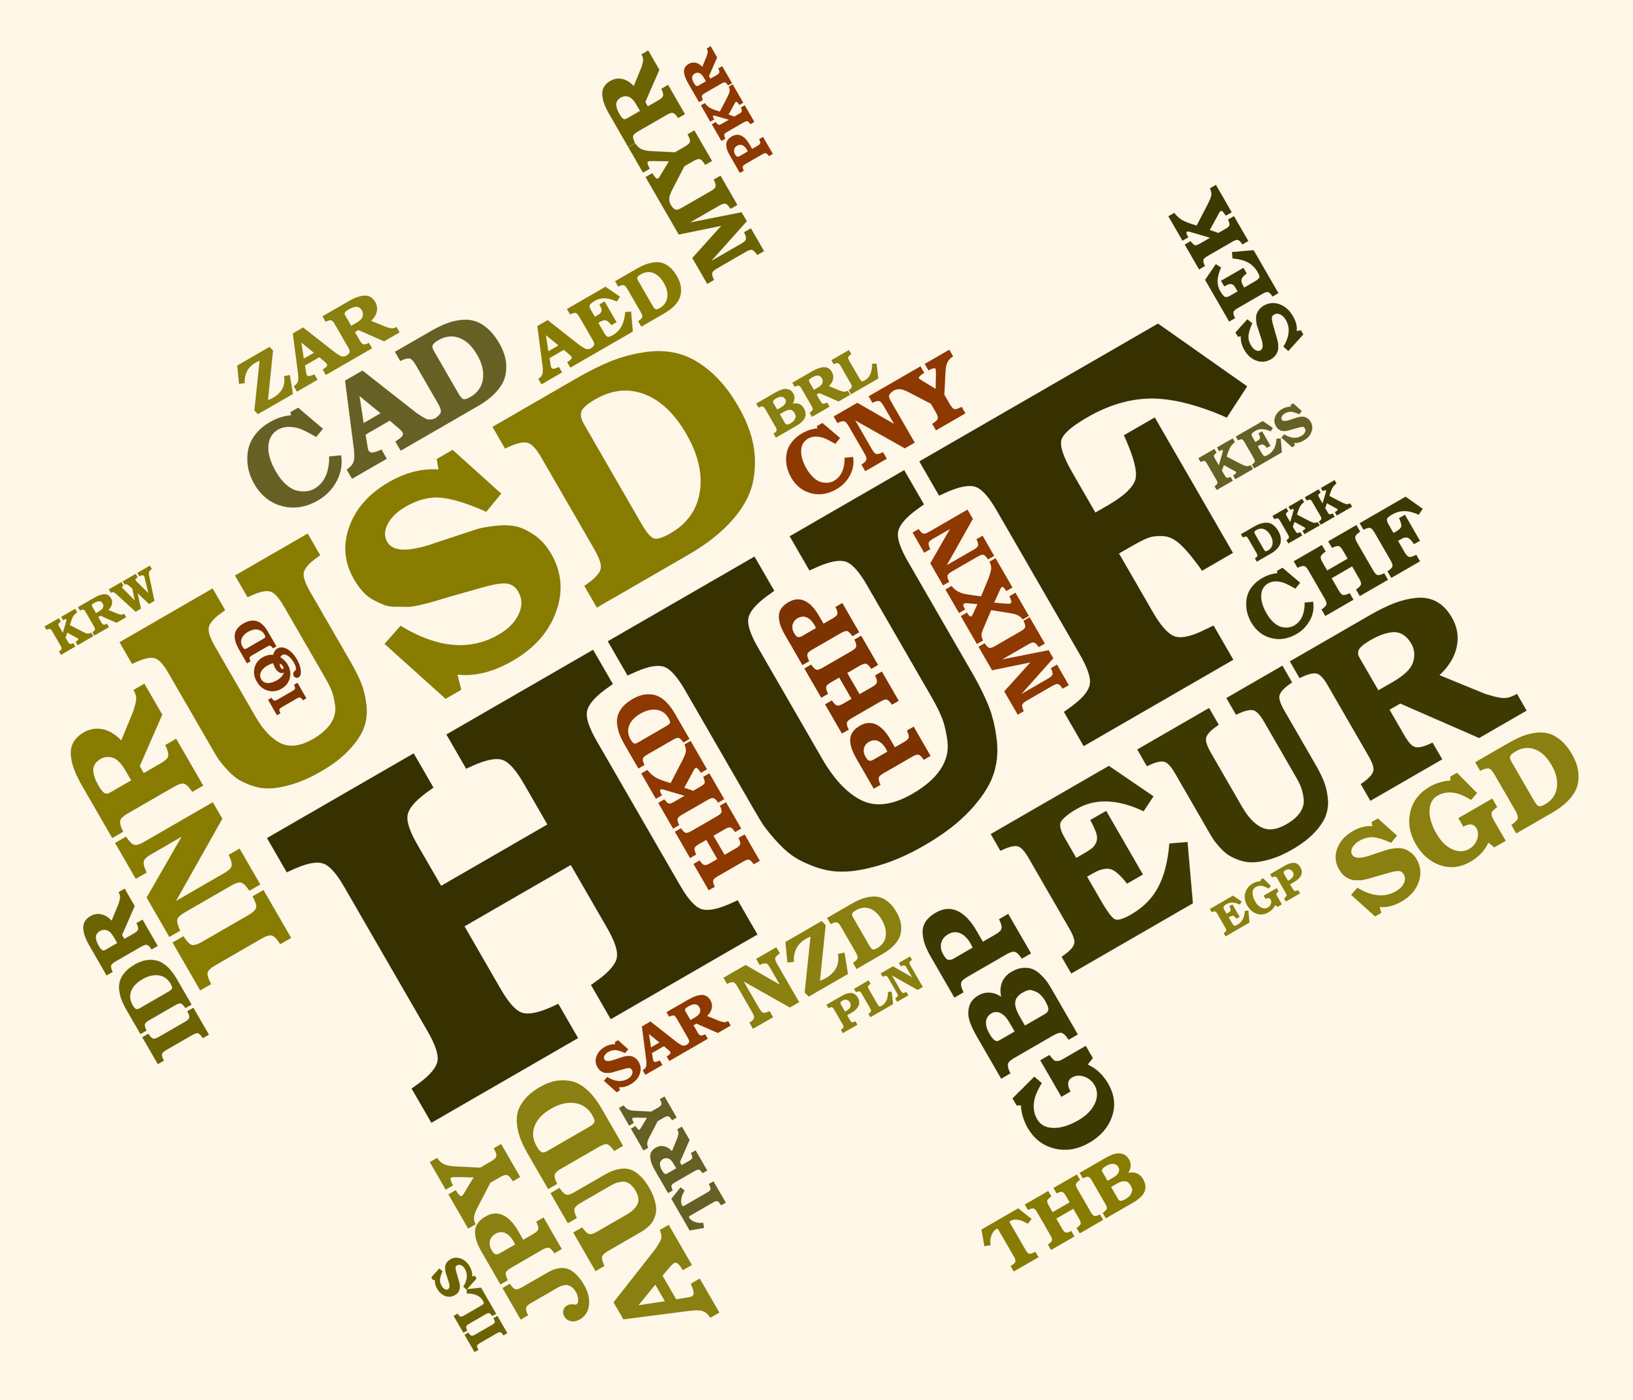 Huf currency indicates worldwide trading and broker photo